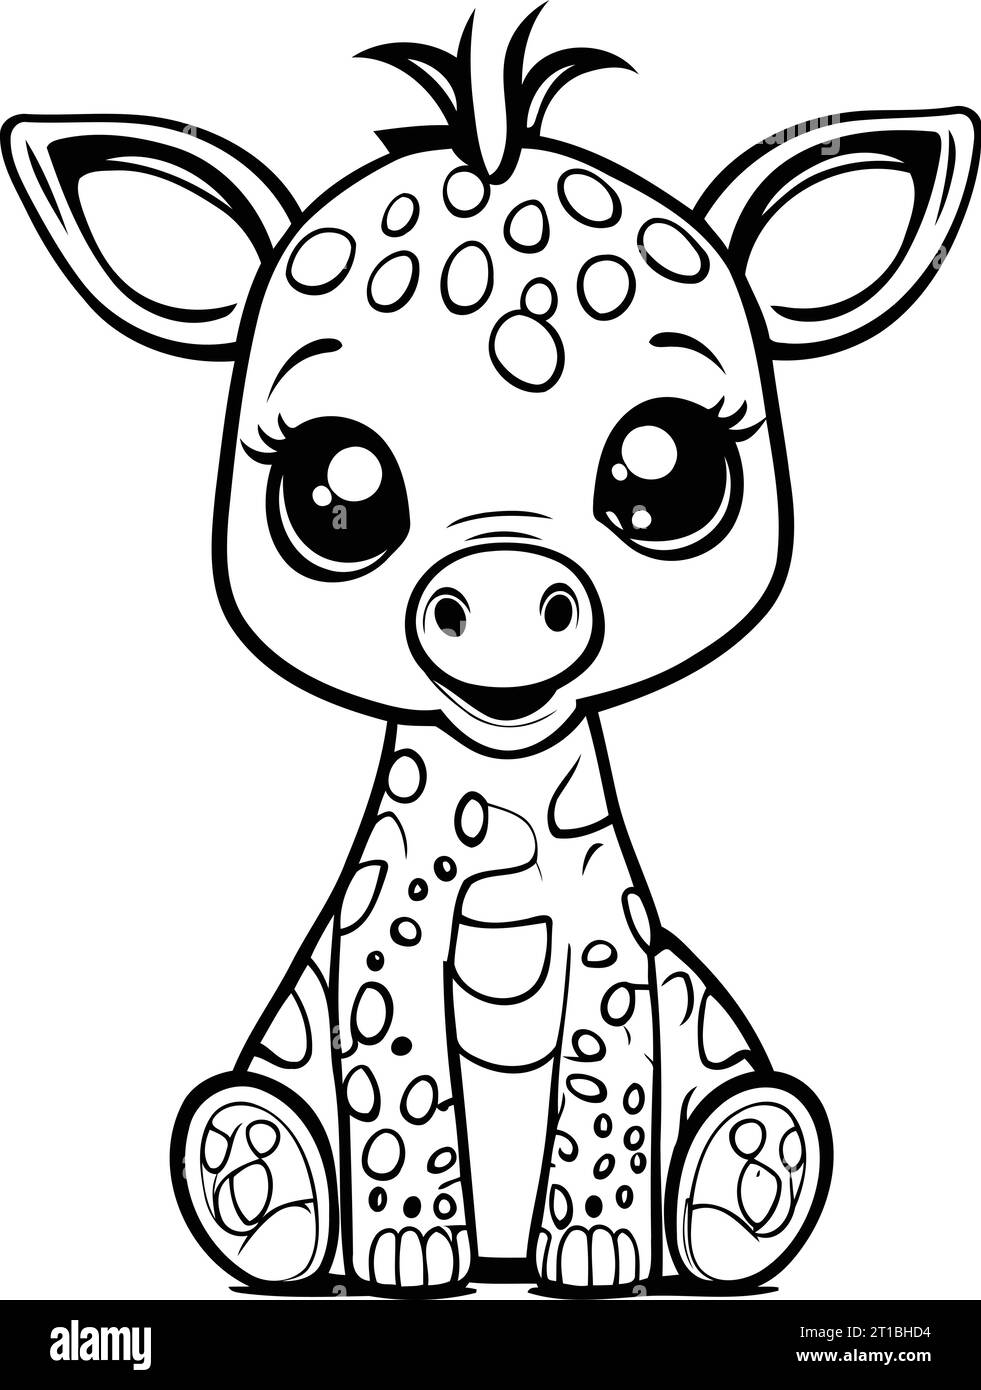 Coloring book for children. Giraffe. Coloring page. Stock Vector